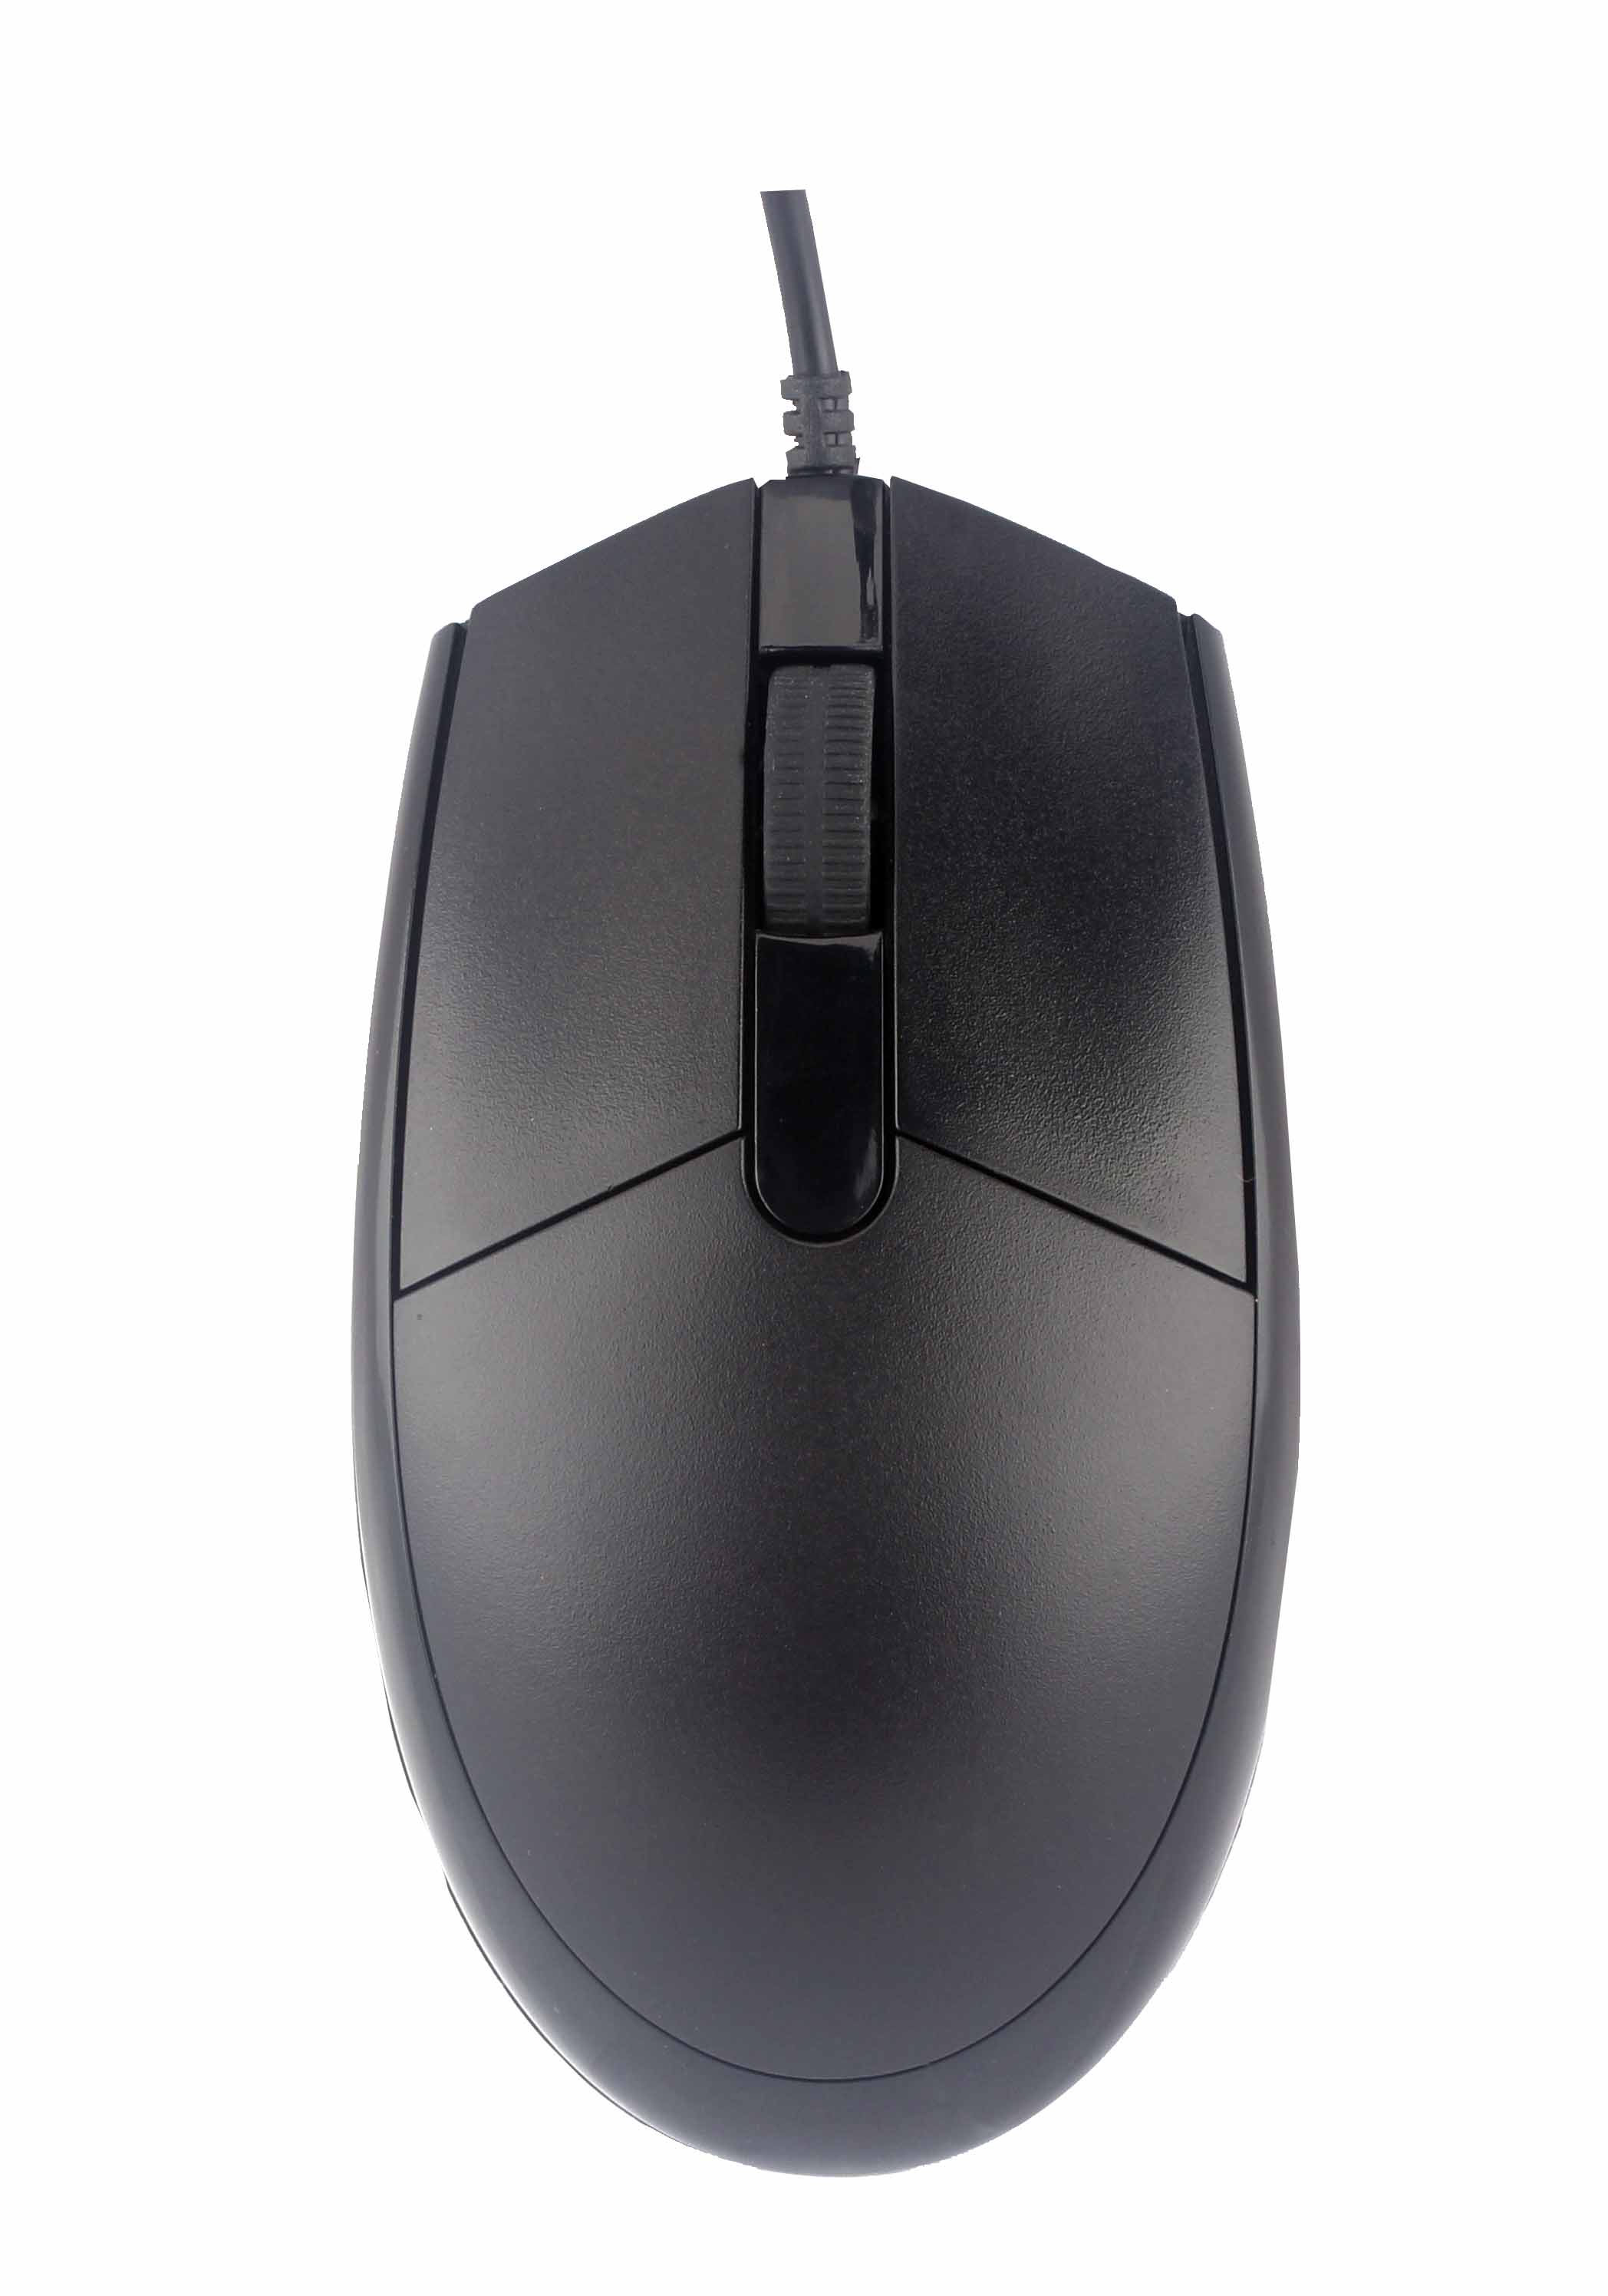 Computer Mouse Big size,Rubber Scroll For Smooth Touch